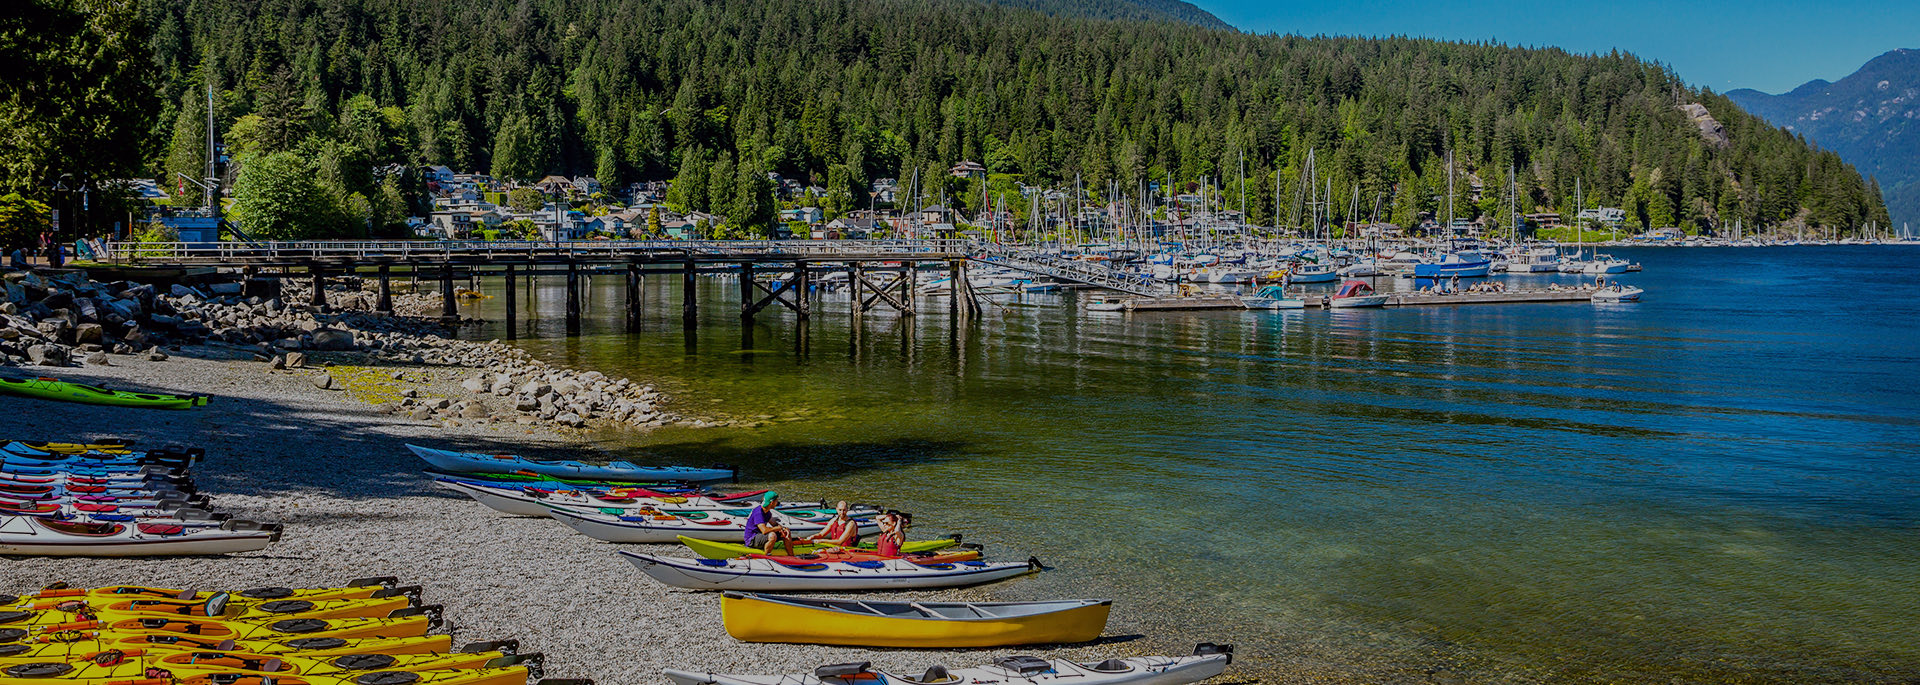 view of kayaks at a dock